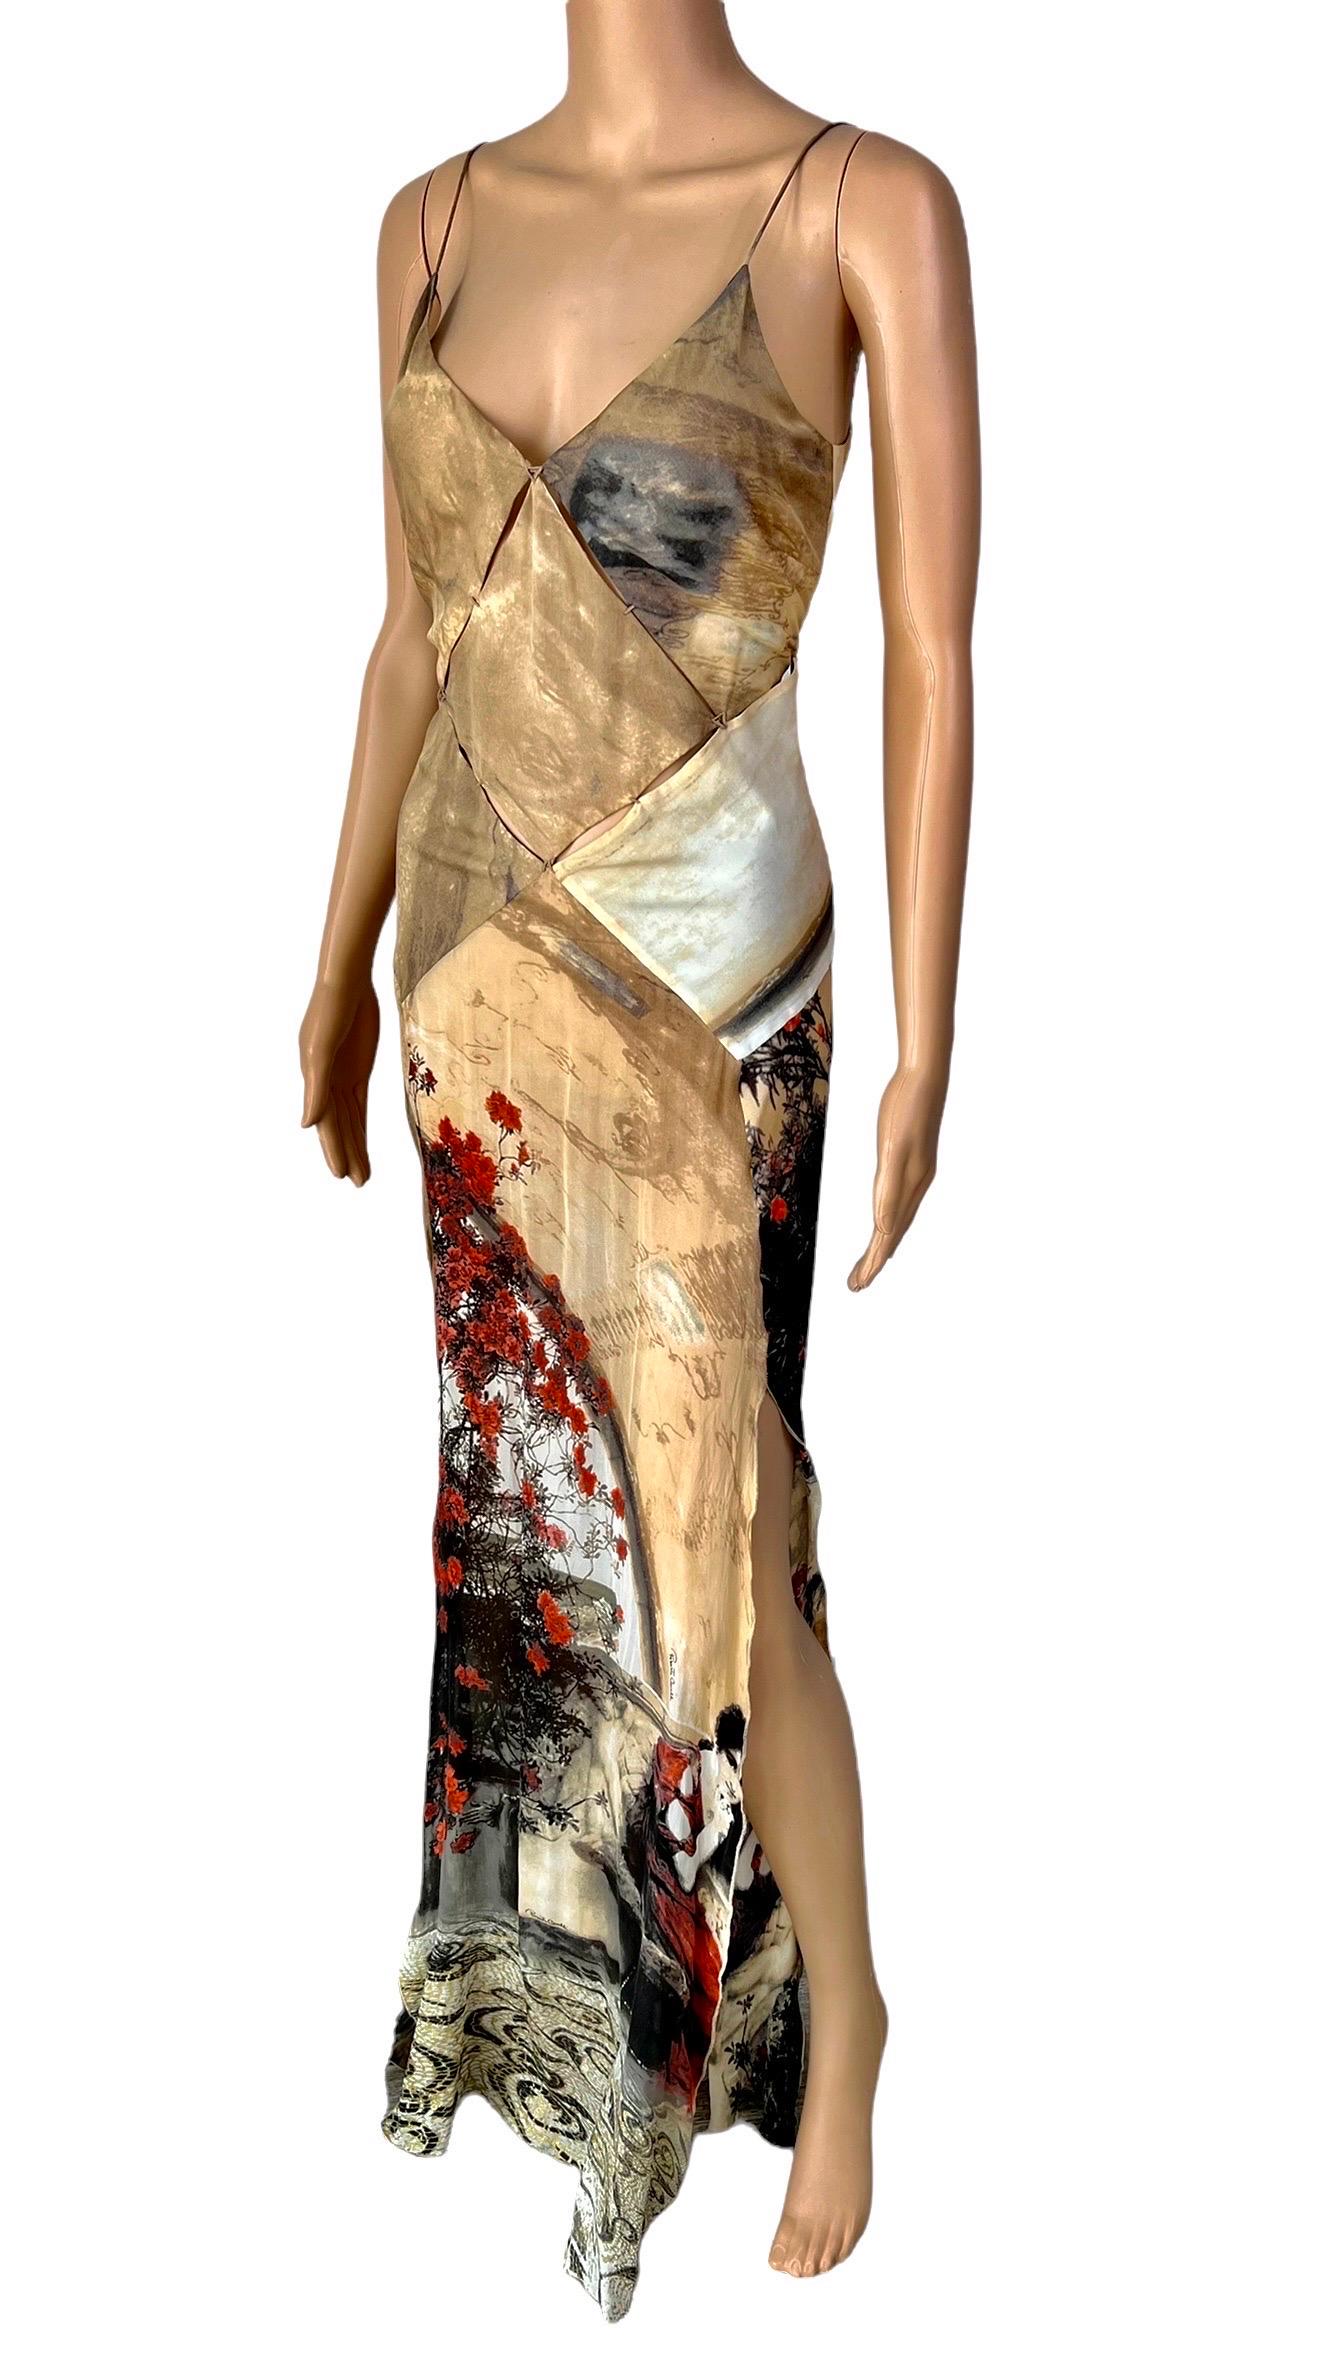 Roberto Cavalli S/S 2004 Runway Cutout High Slit Silk Slip Evening Dress Gown In Good Condition For Sale In Naples, FL